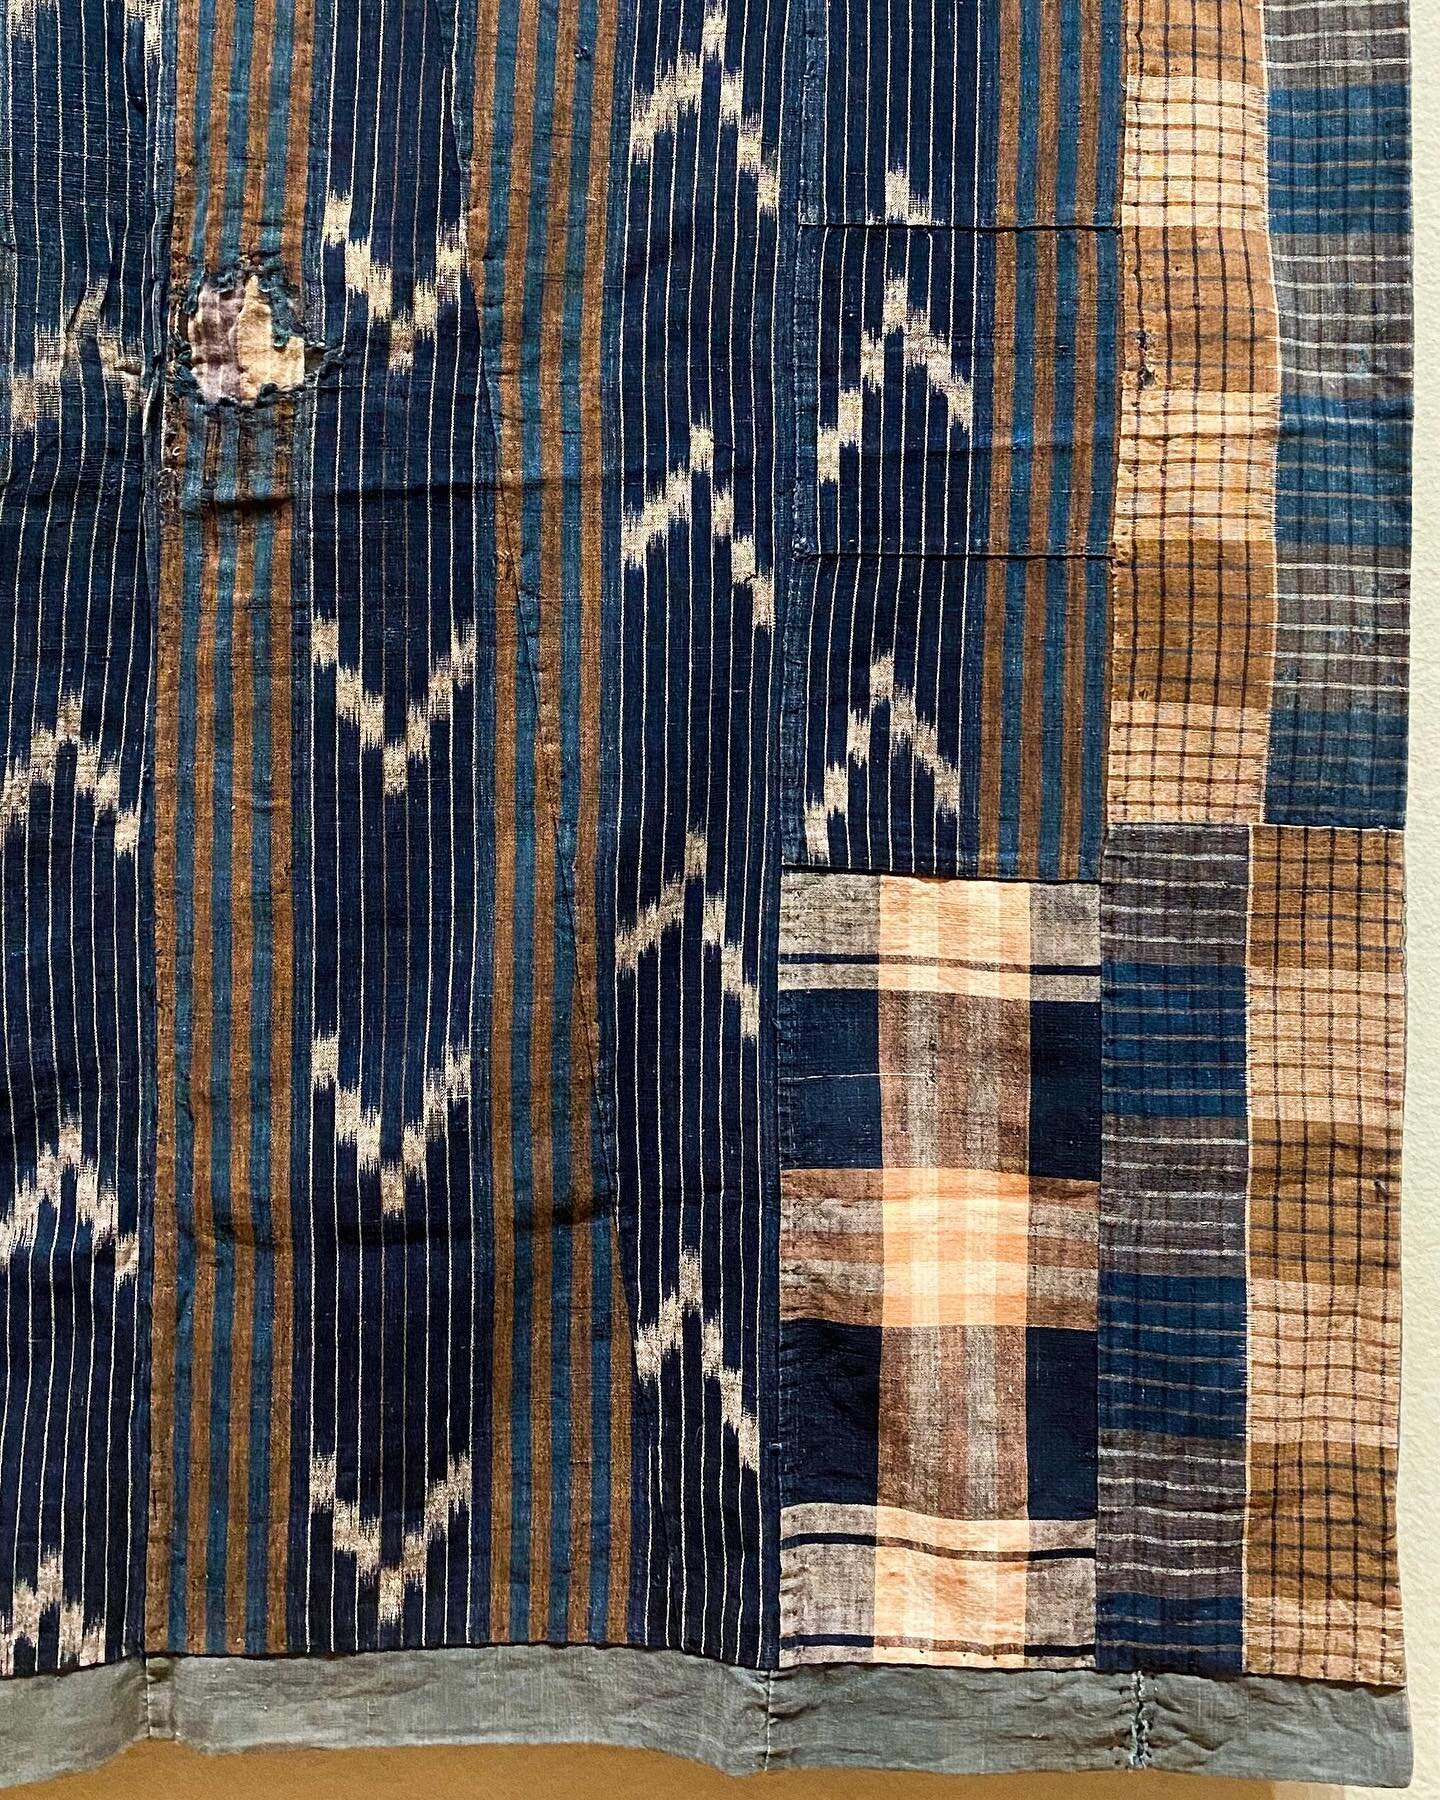 still thinking about this exhibition @seattleartmuseum weeks later, and probably will be for a long time. i had almost no prior knowledge of the long history and ancient traditions of ikat textiles around the world, so i was blown away by this eye-op